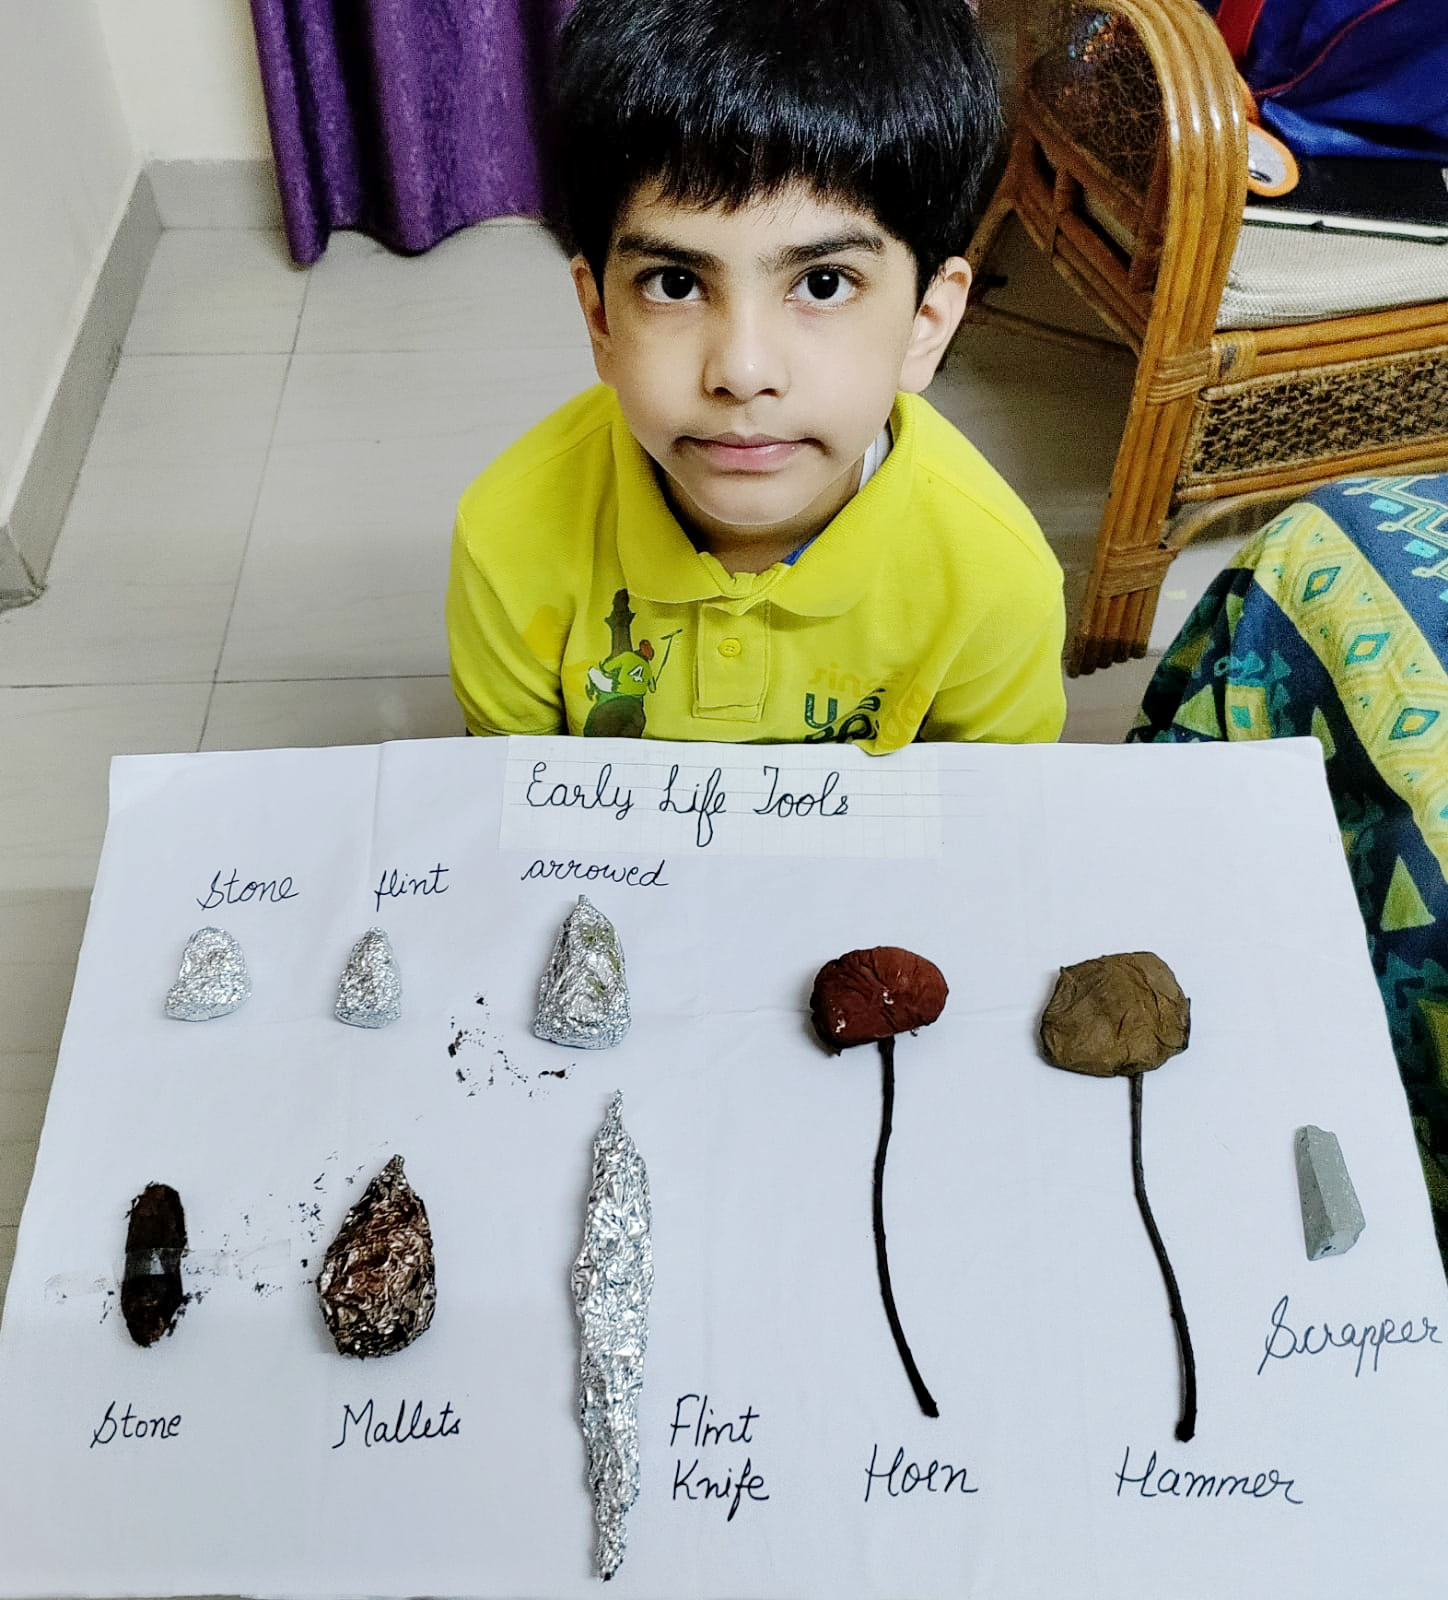 Presidium Dwarka-6, STUDENTS LEARN ABOUT THE DIFFERENT TOOLS OF EARLY LIFE